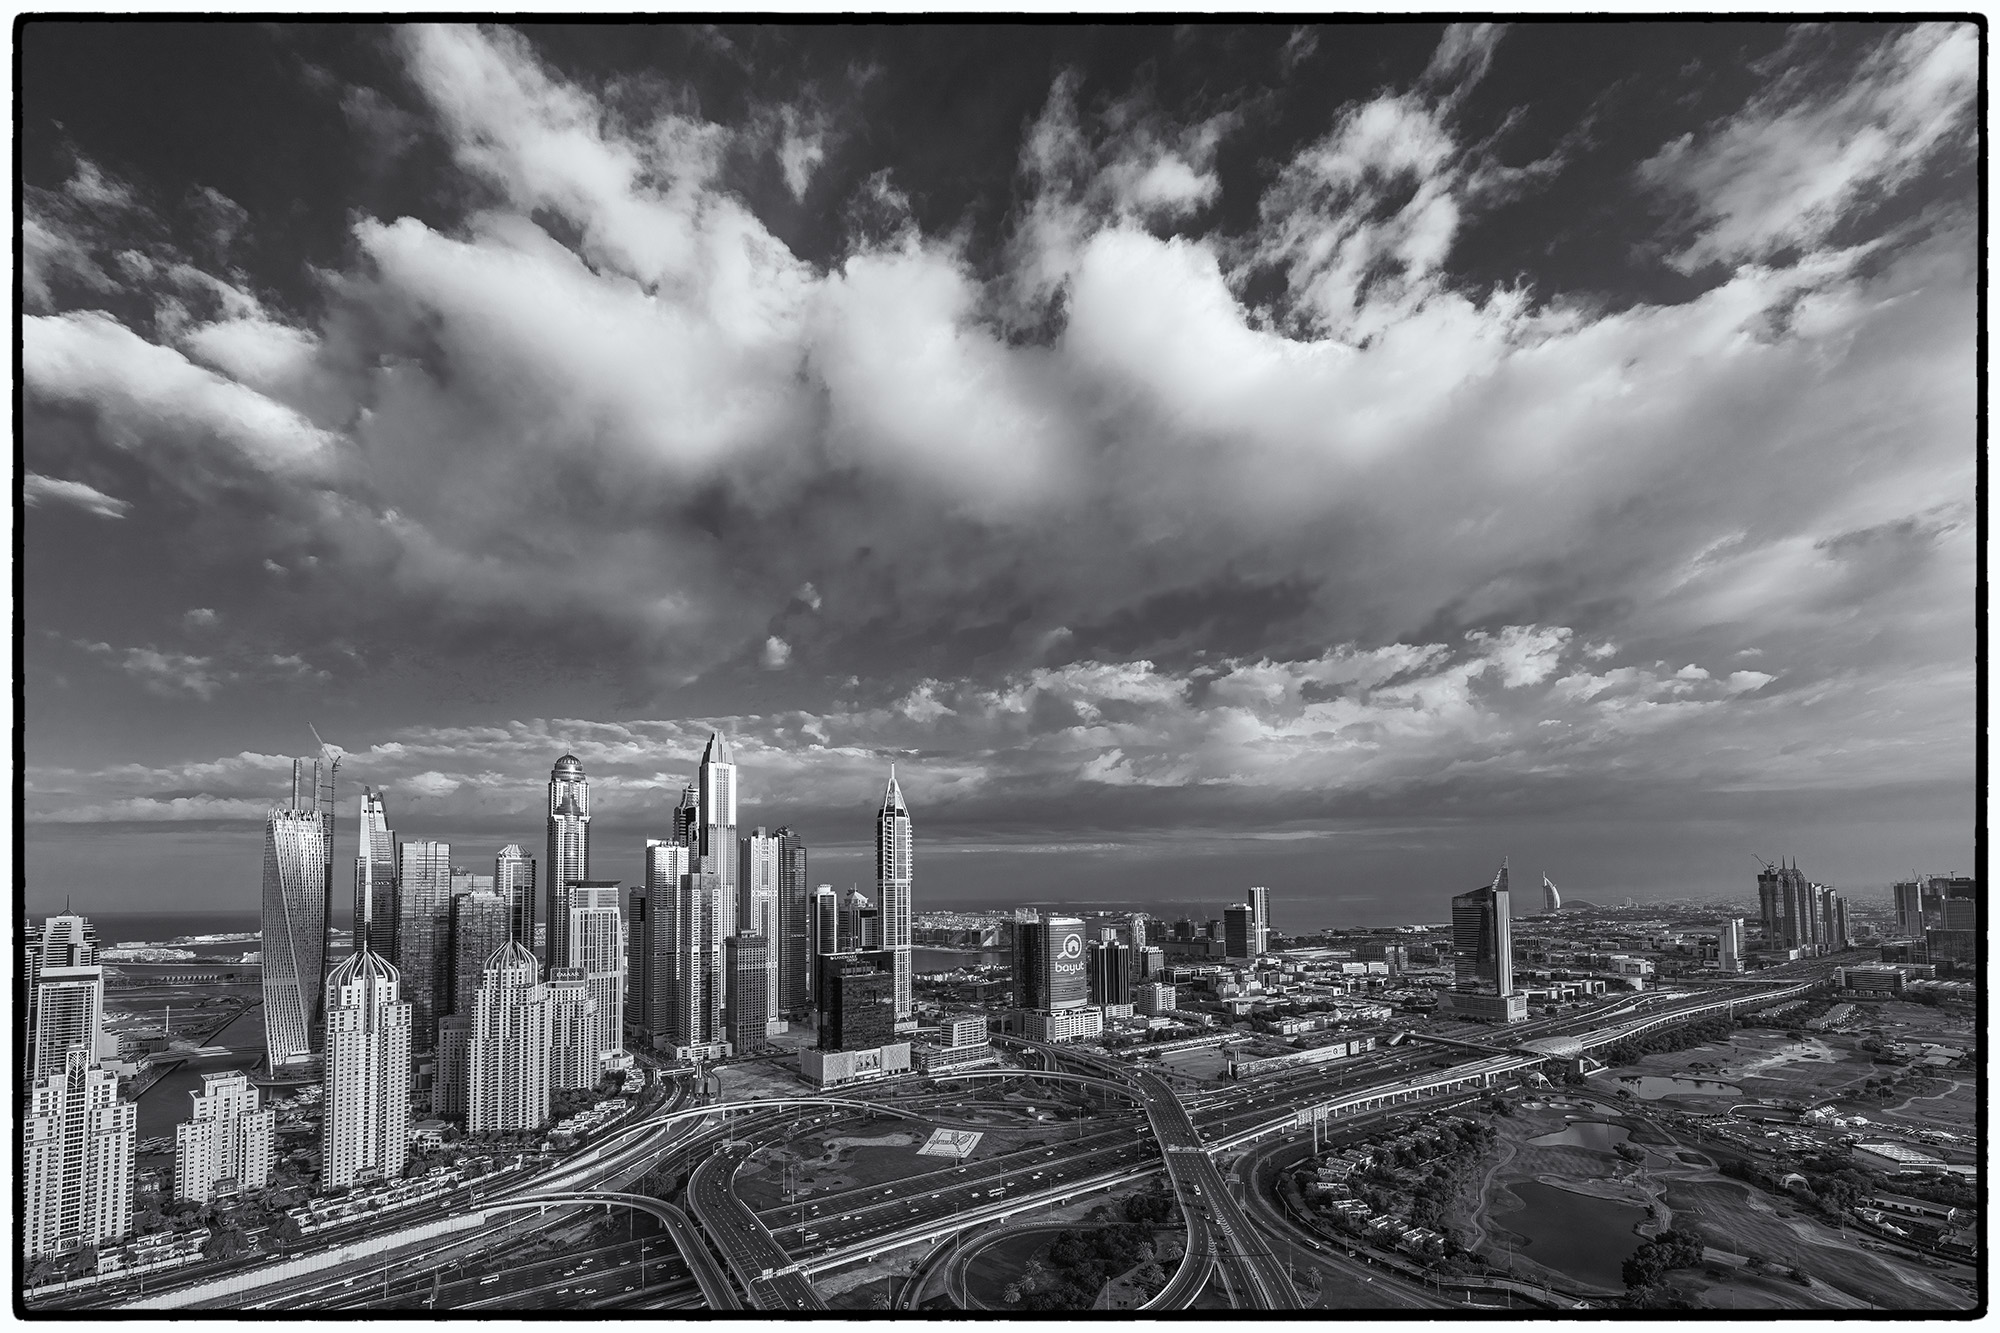 From the heights of the Shangri La hotel in Dubai Marina, "Skies Unveiled" offers a monochromatic marvel. The skyline of Dubai...